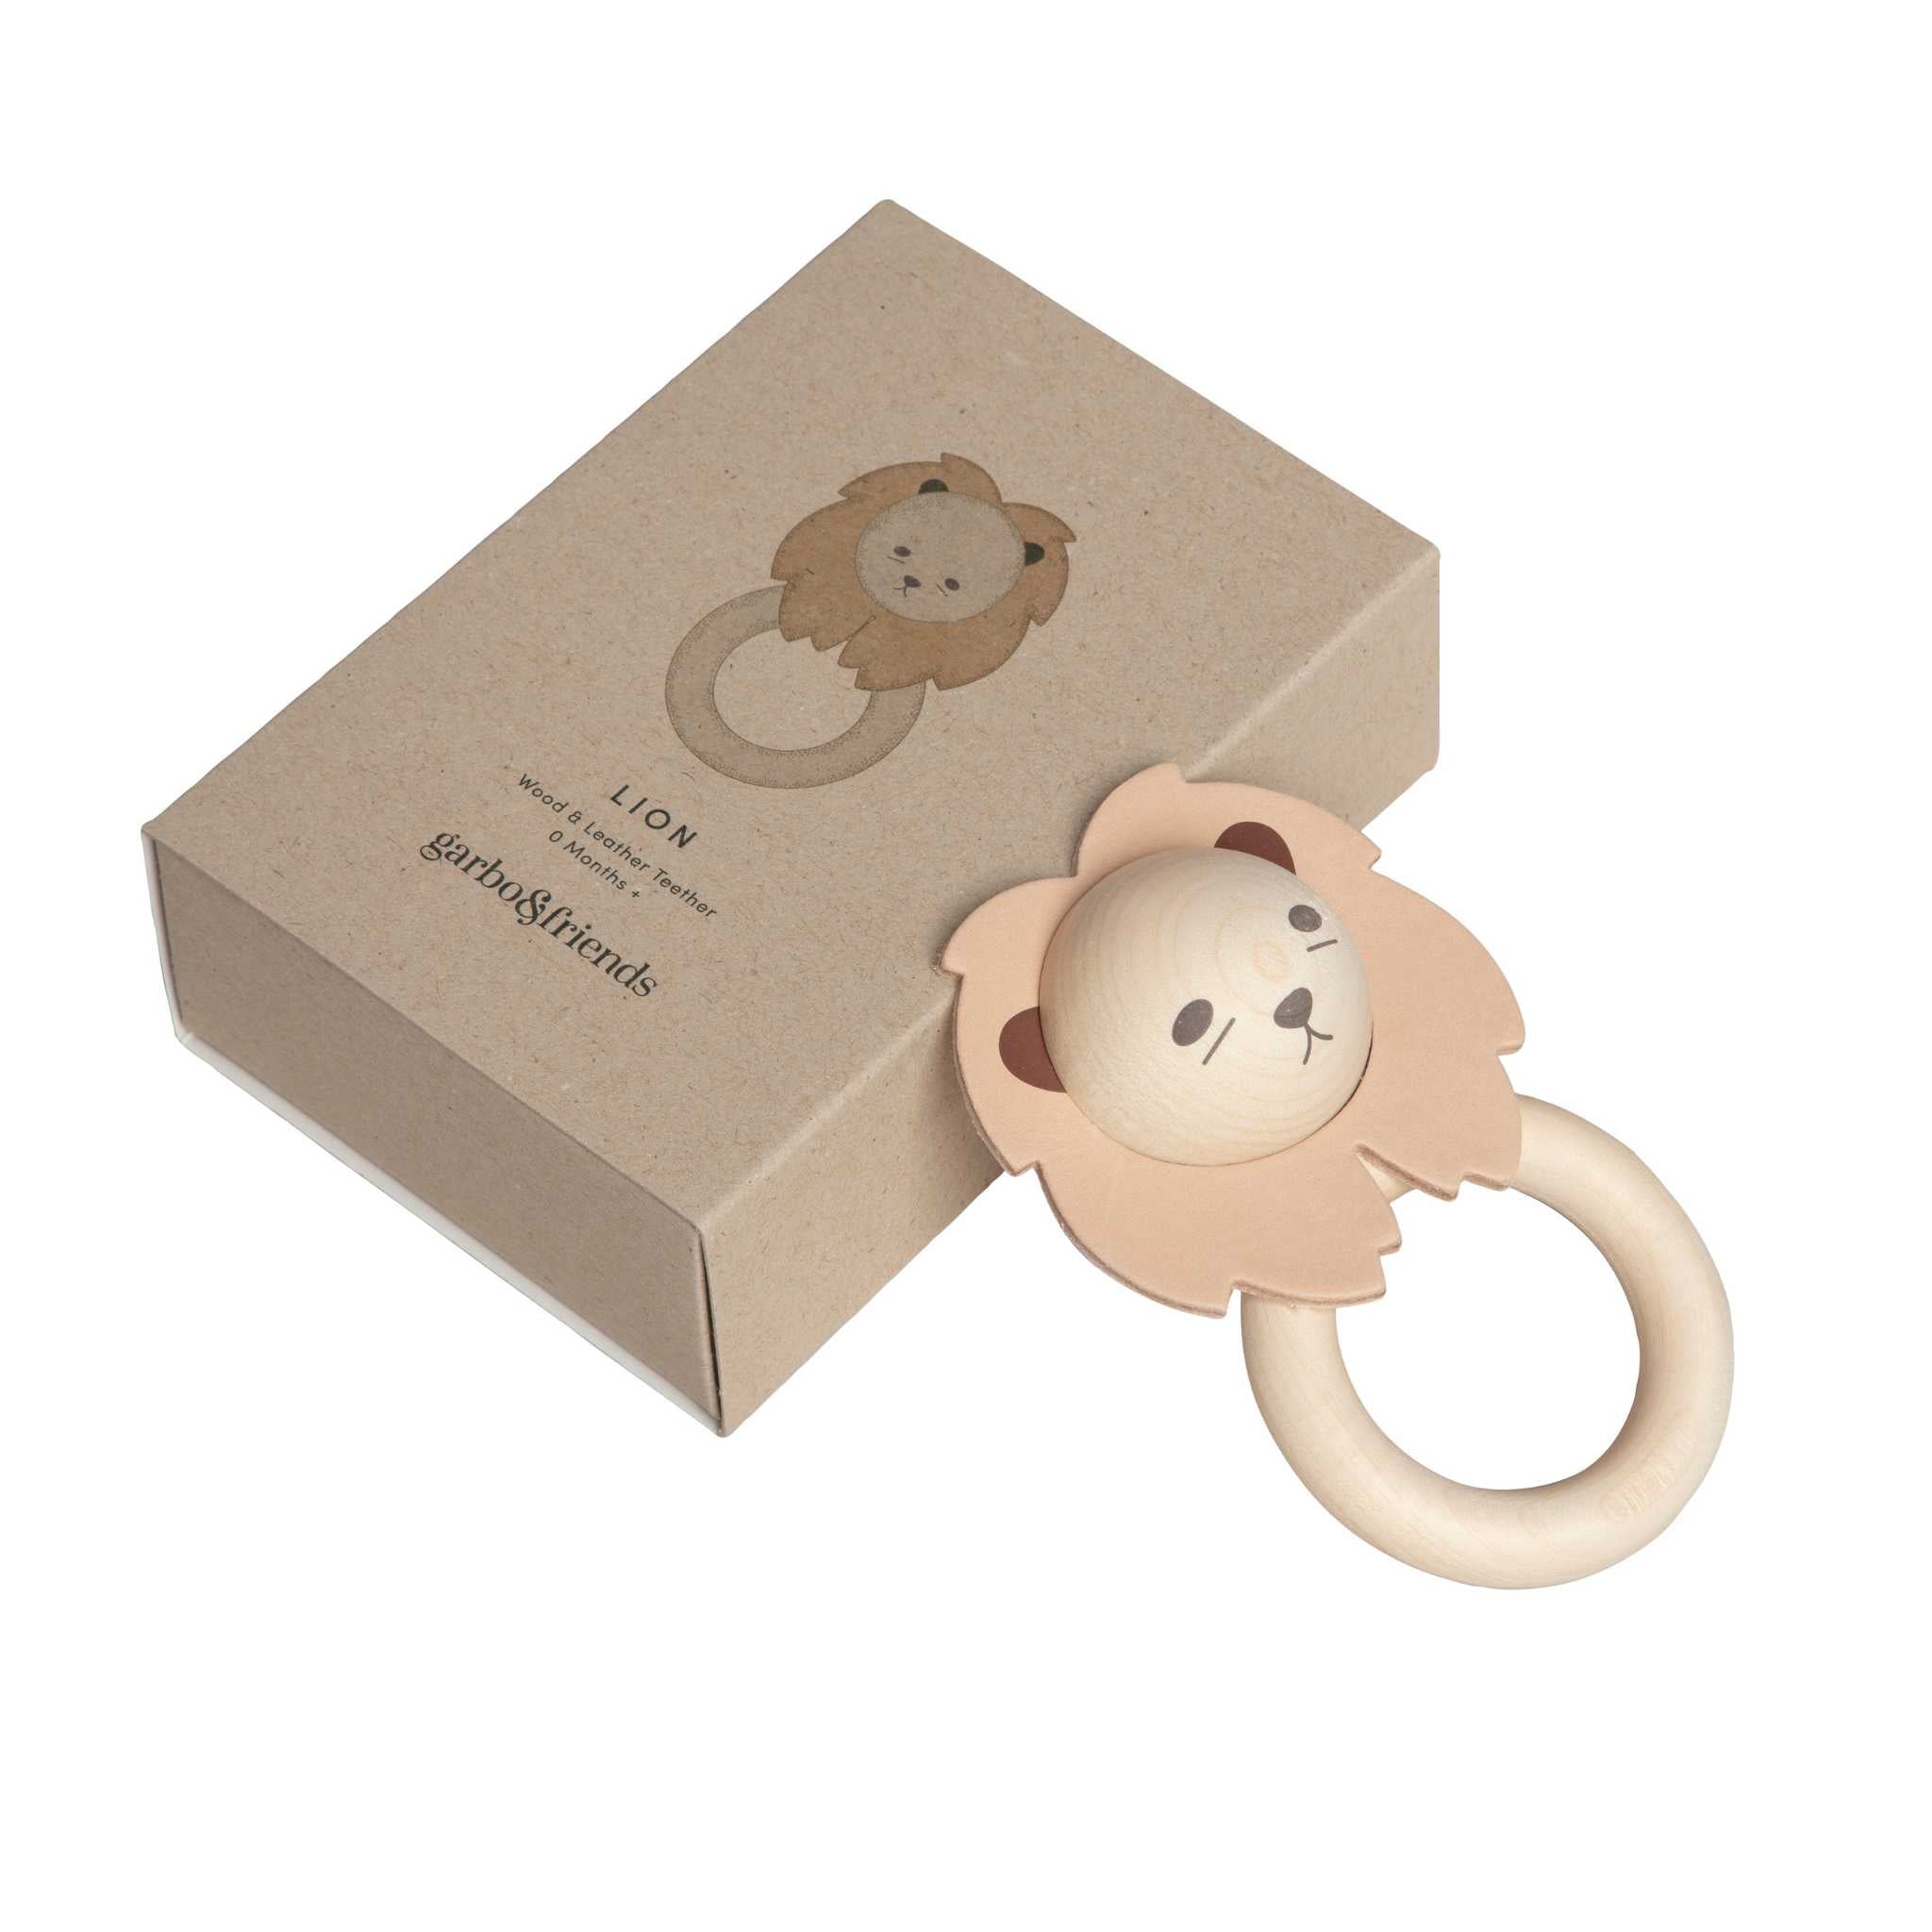 Lion Teether